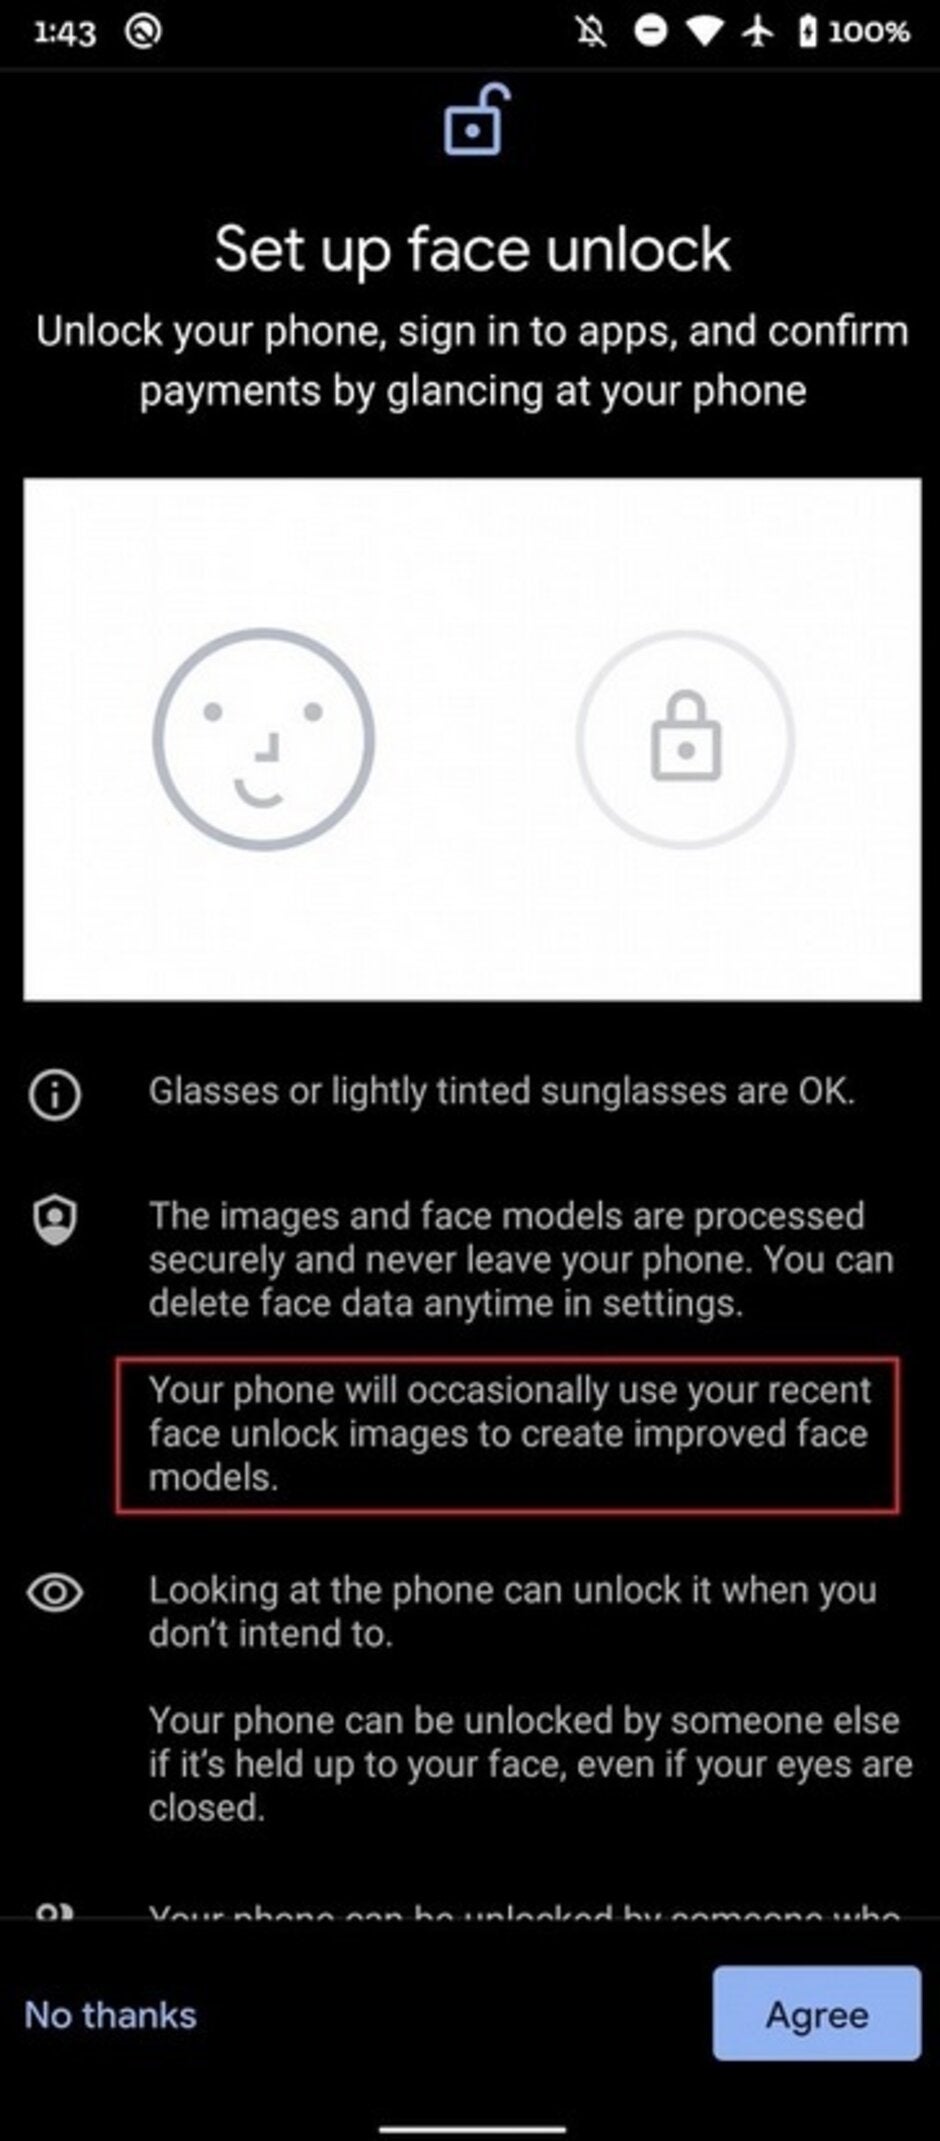 From time to time, Face Unlock will use recent images to improve its face models - Update brings some "hidden" changes to the Pixel 4 series